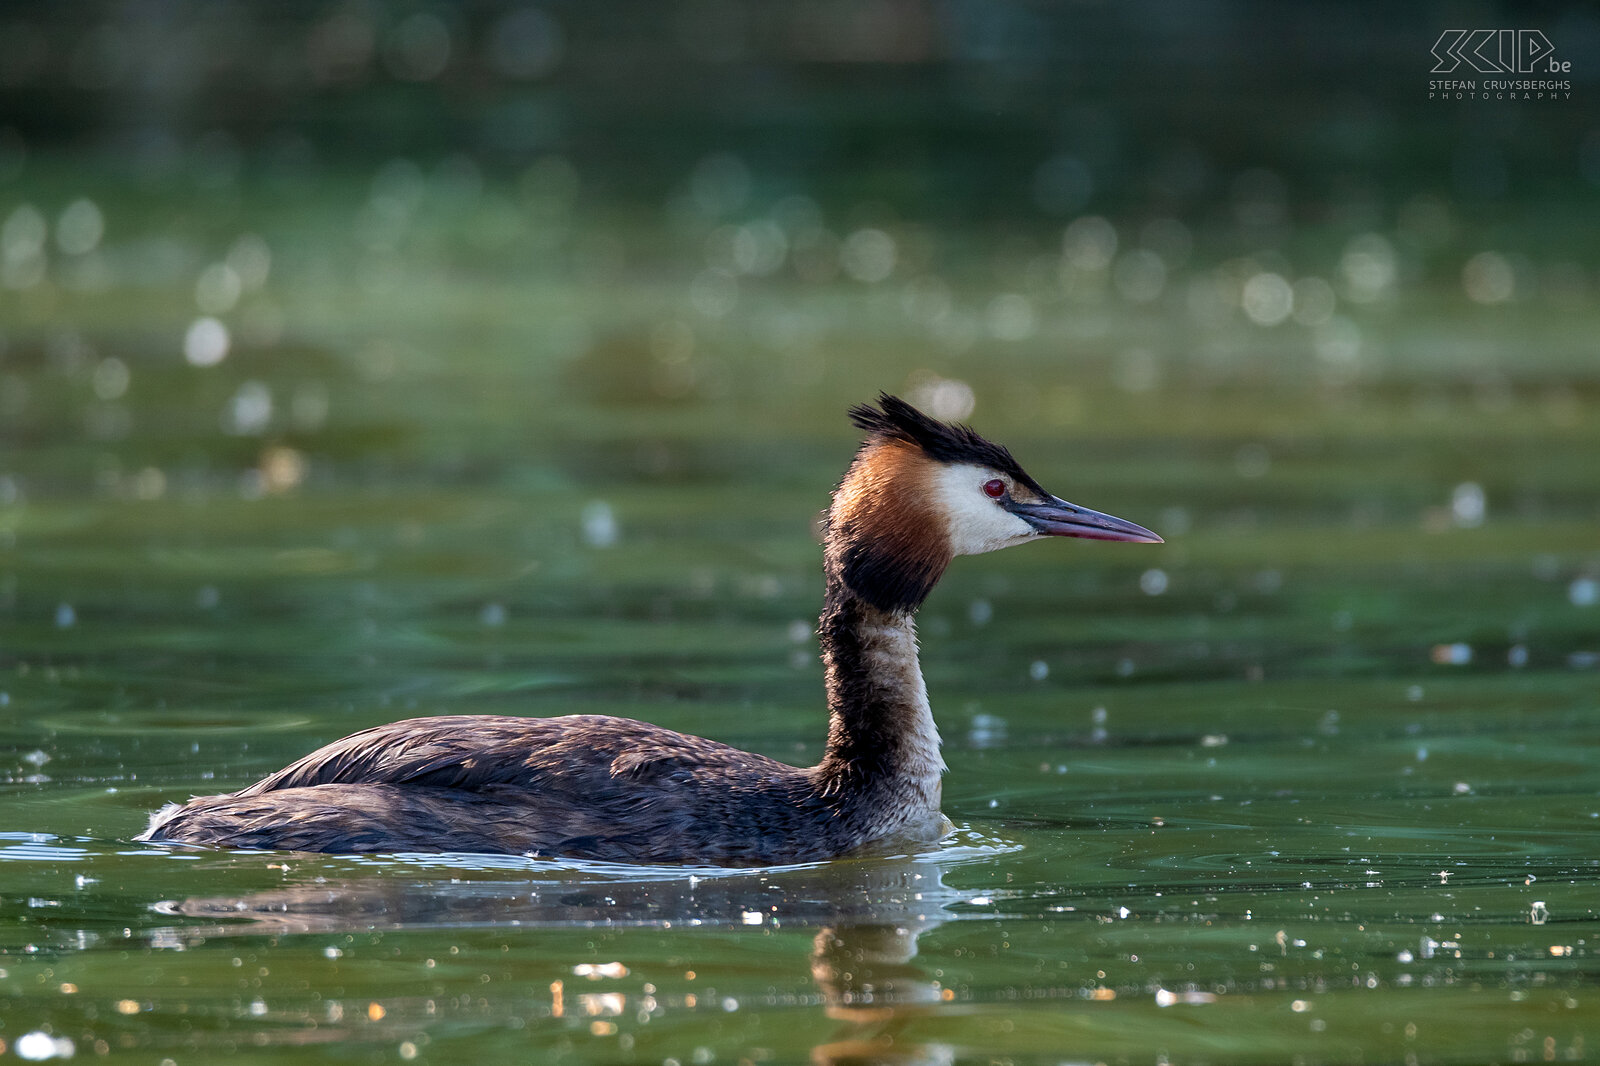 Water birds - Great crested grebe Great crested grebe / Podiceps cristatus Stefan Cruysberghs